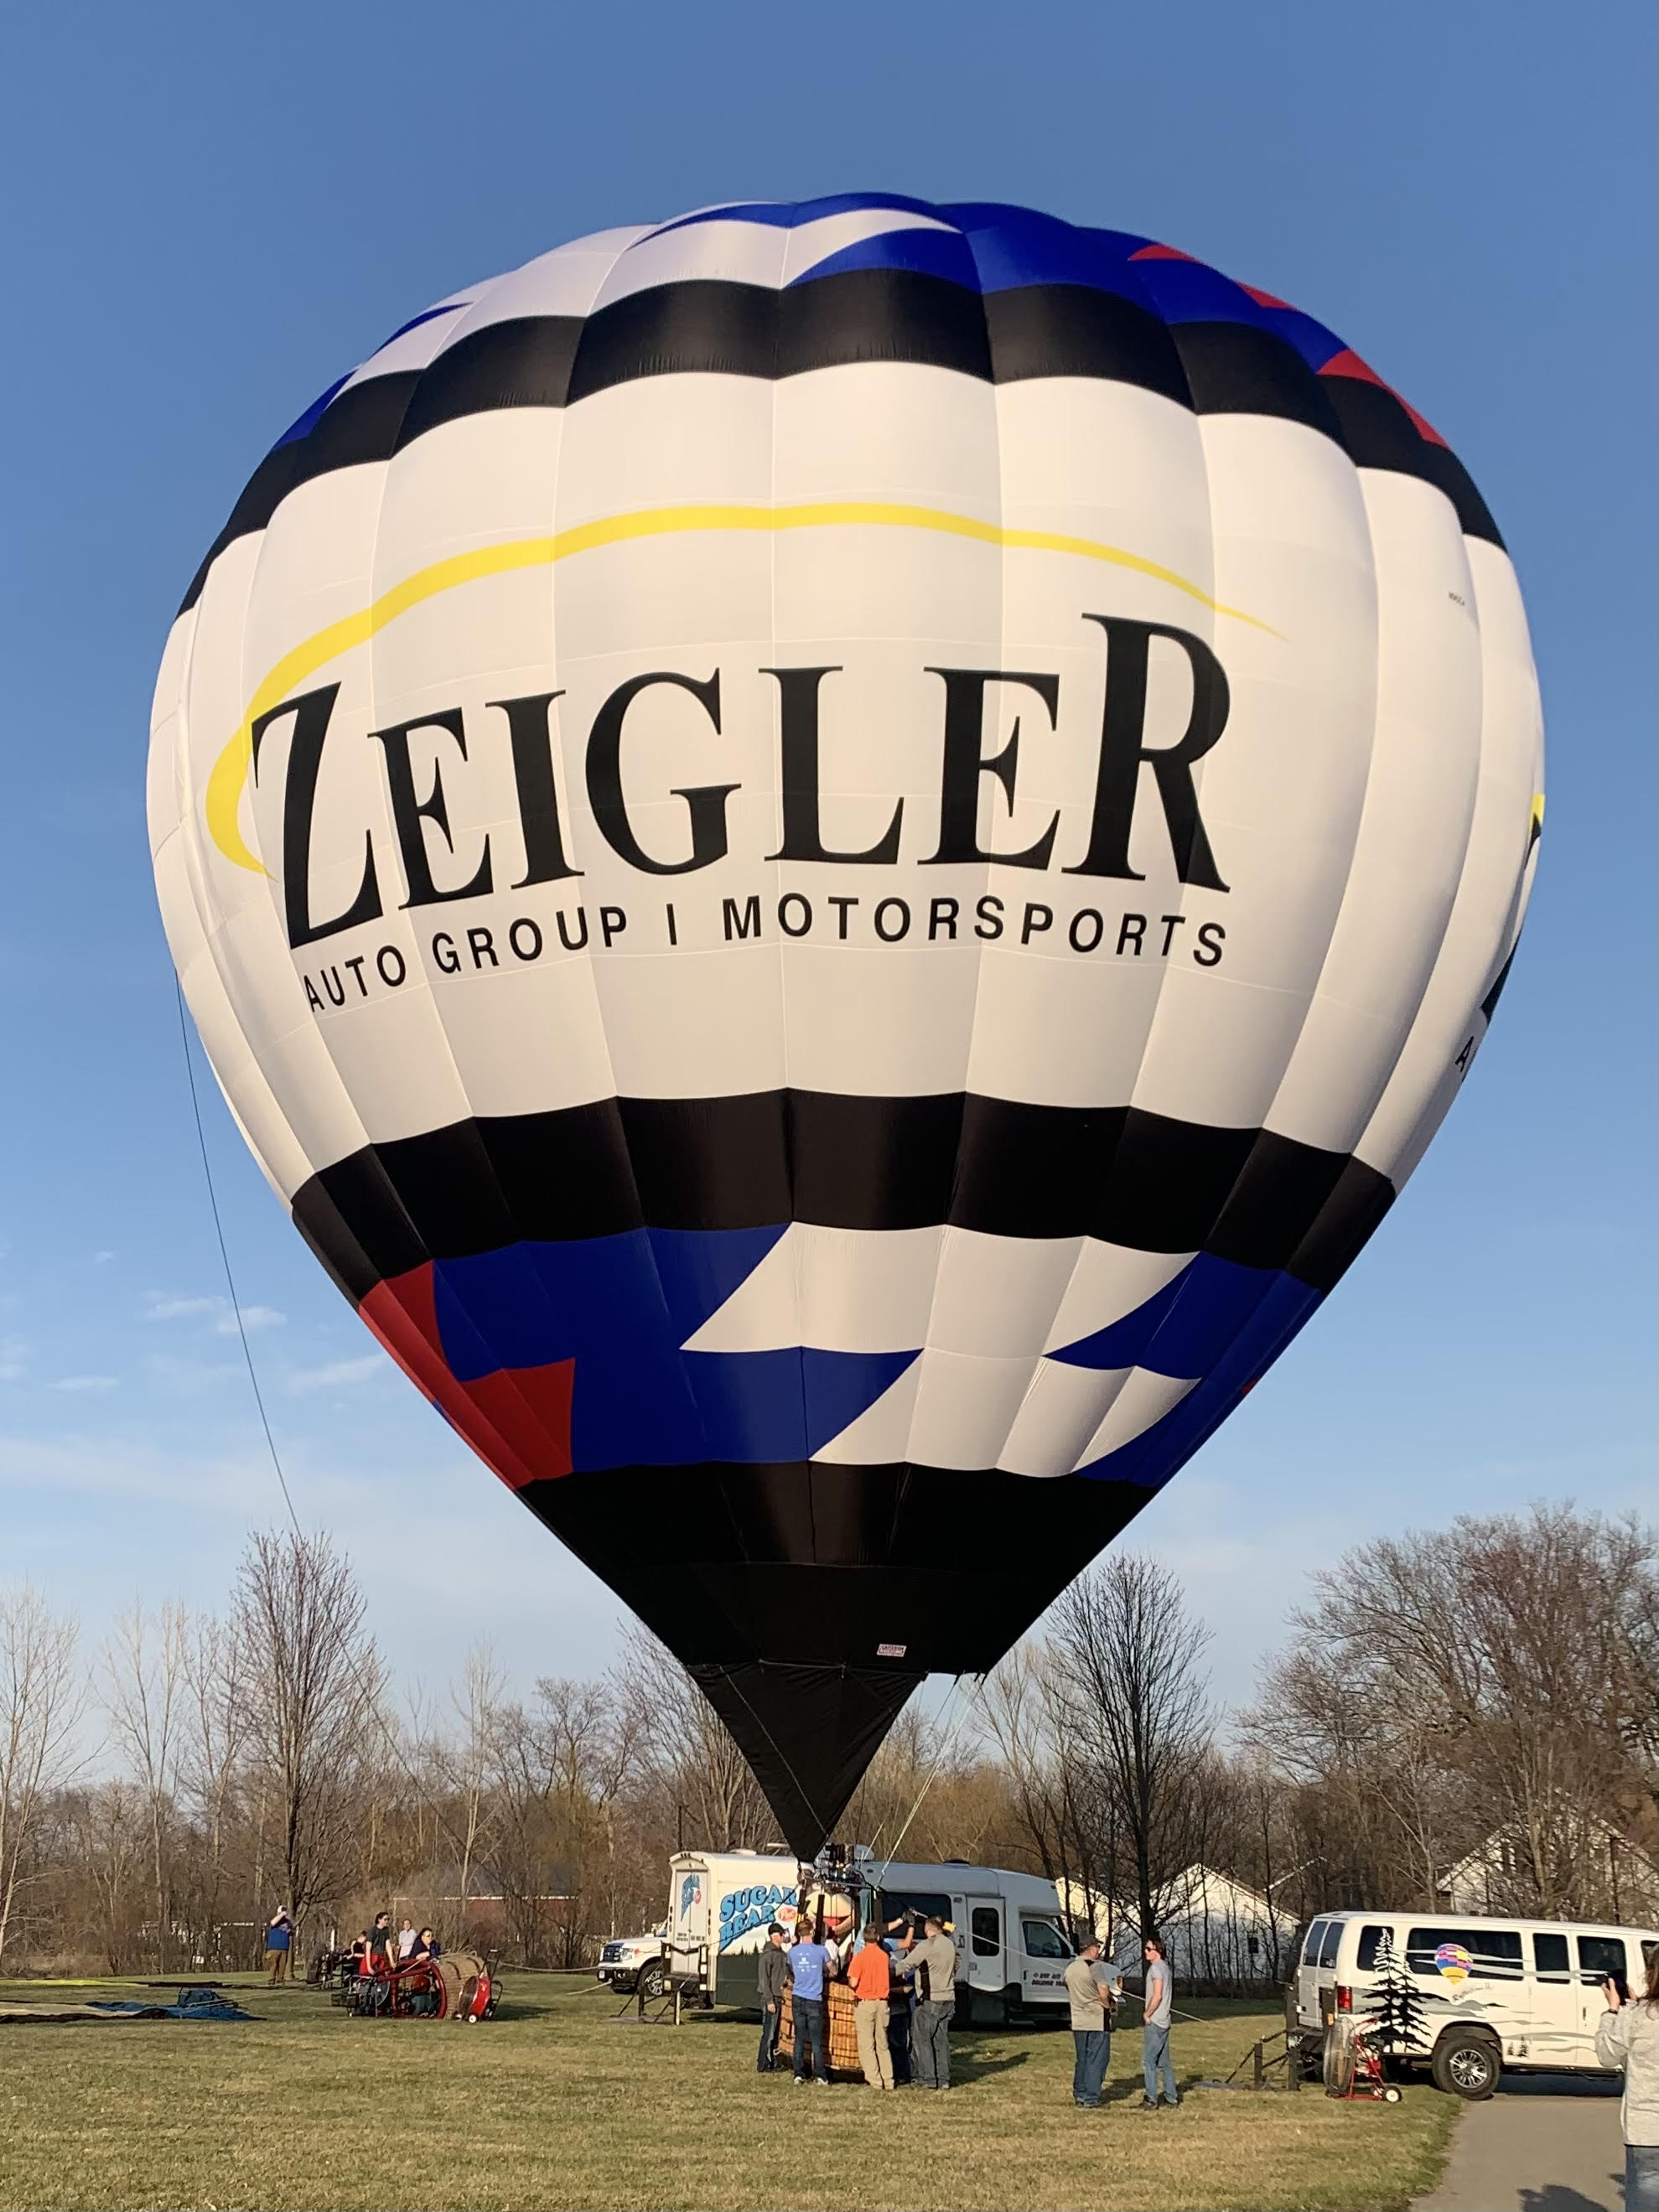 Zeigler Auto Group's Hot Air Balloon During Its First Test Flight On Easter Sunday